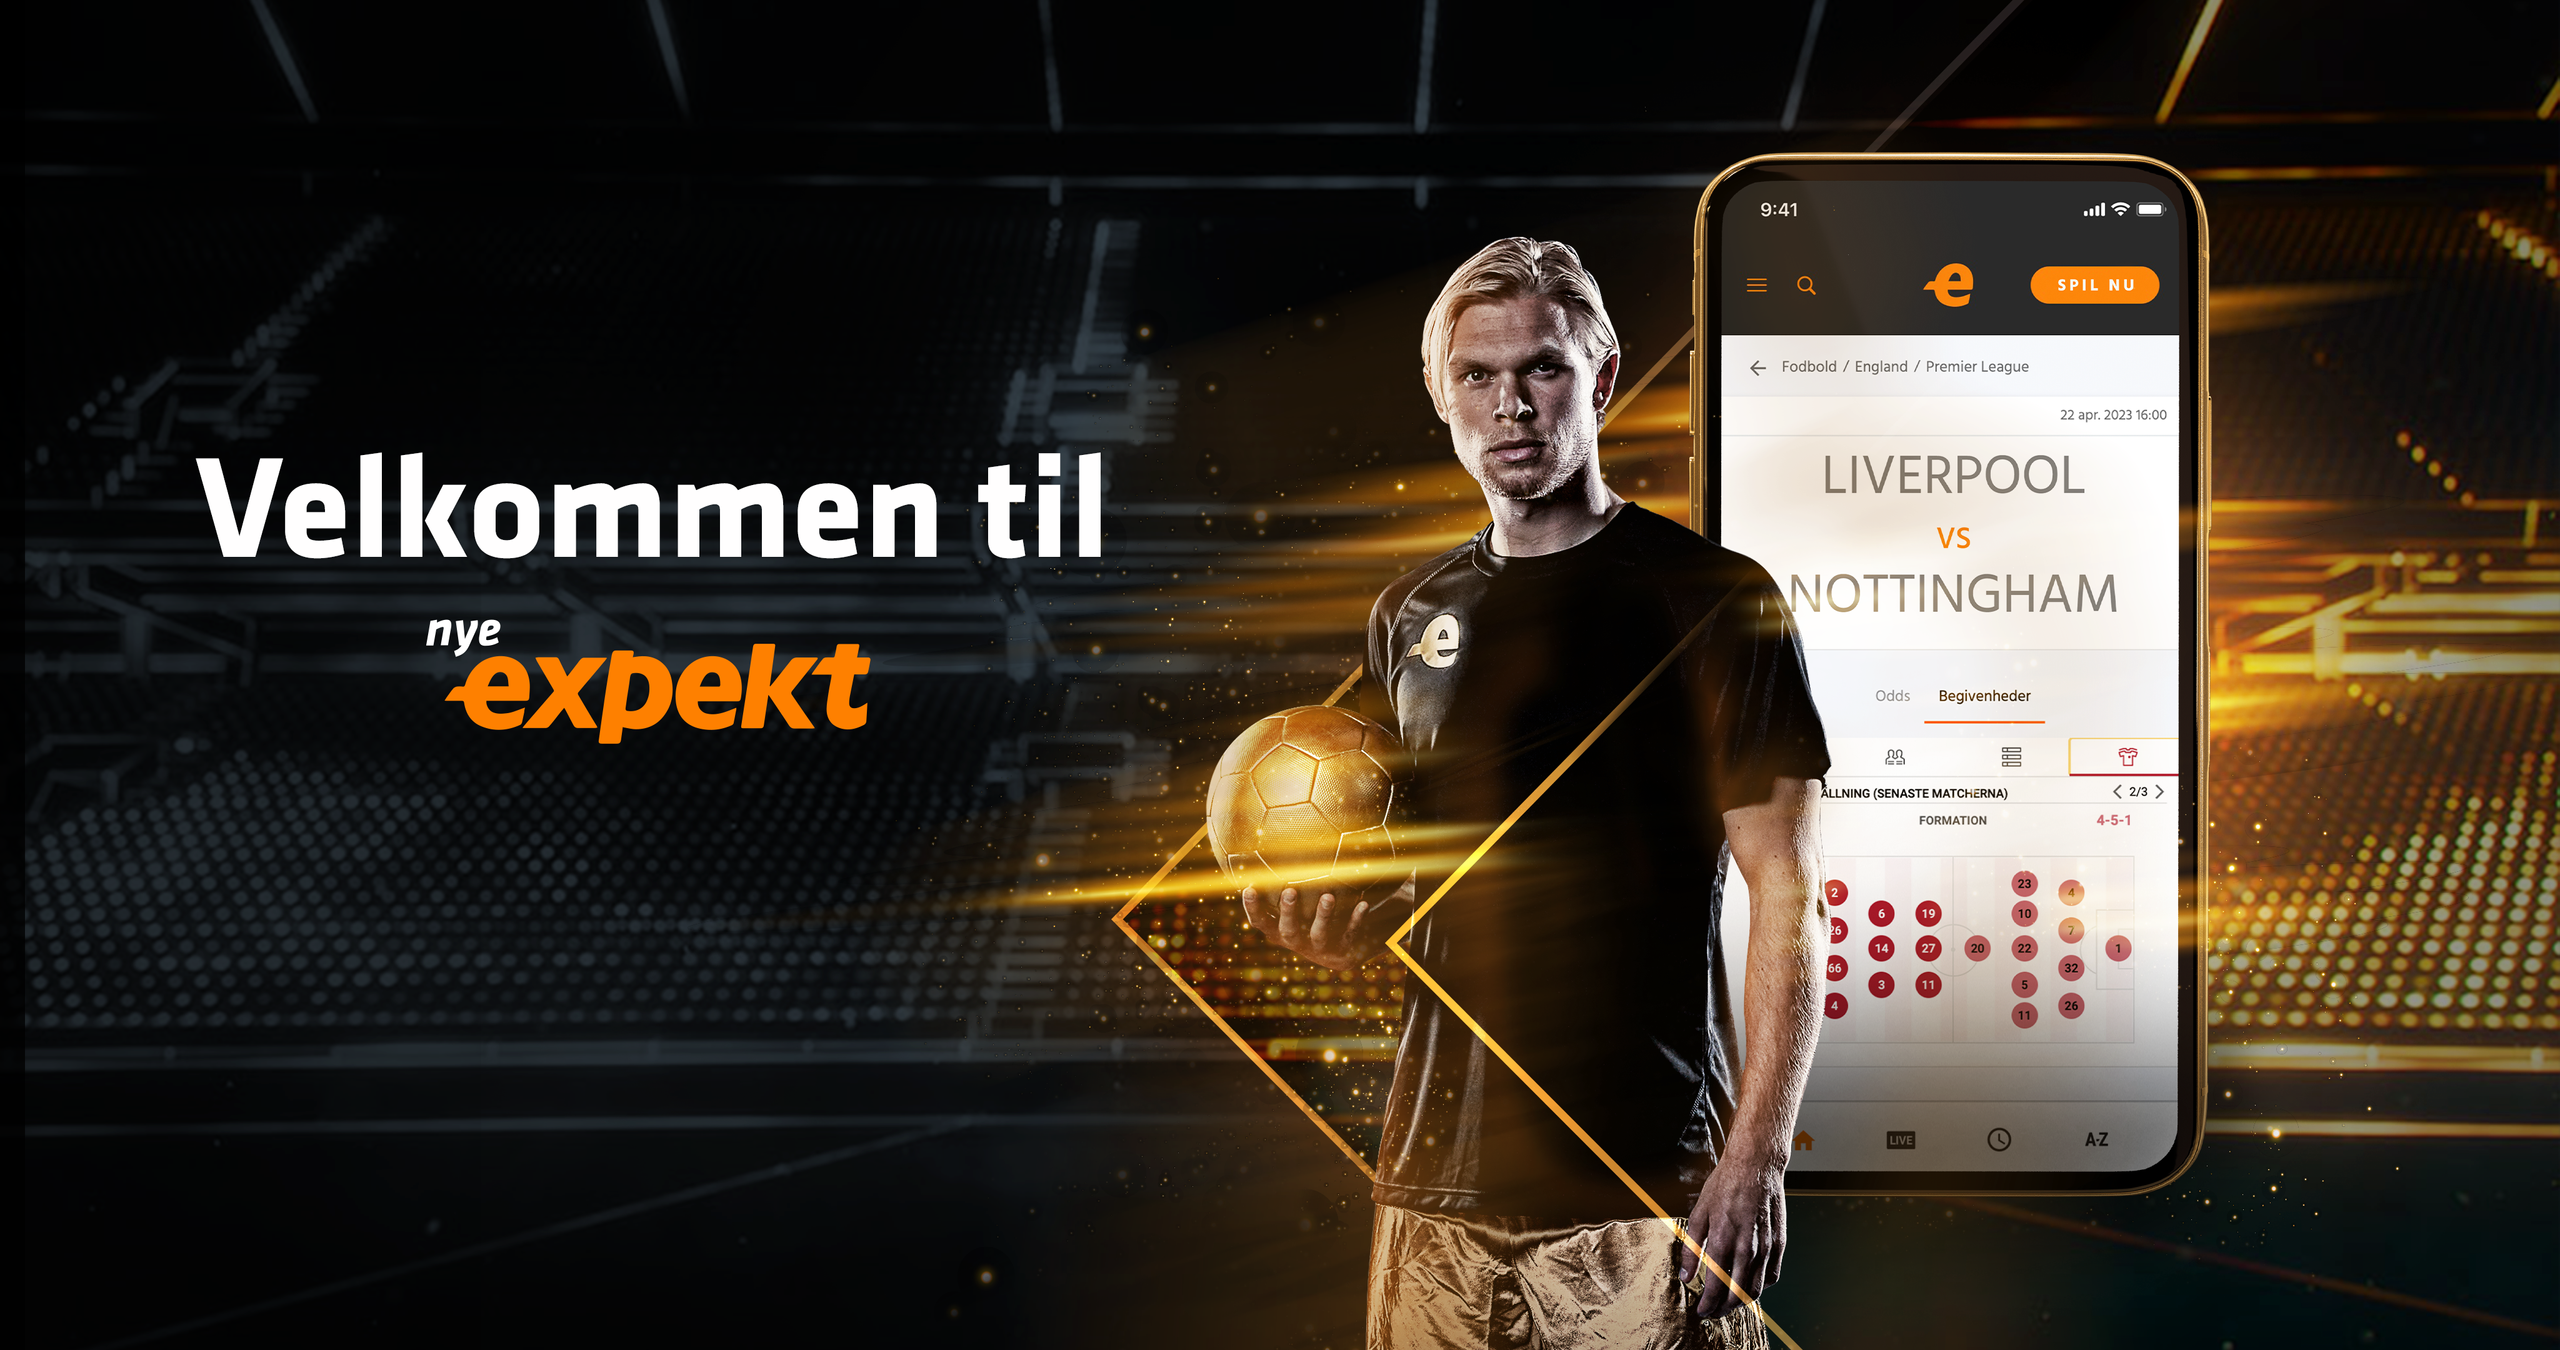 LeoVegas Group launches “nye expekt” in Denmark, strengthening the sports betting offering